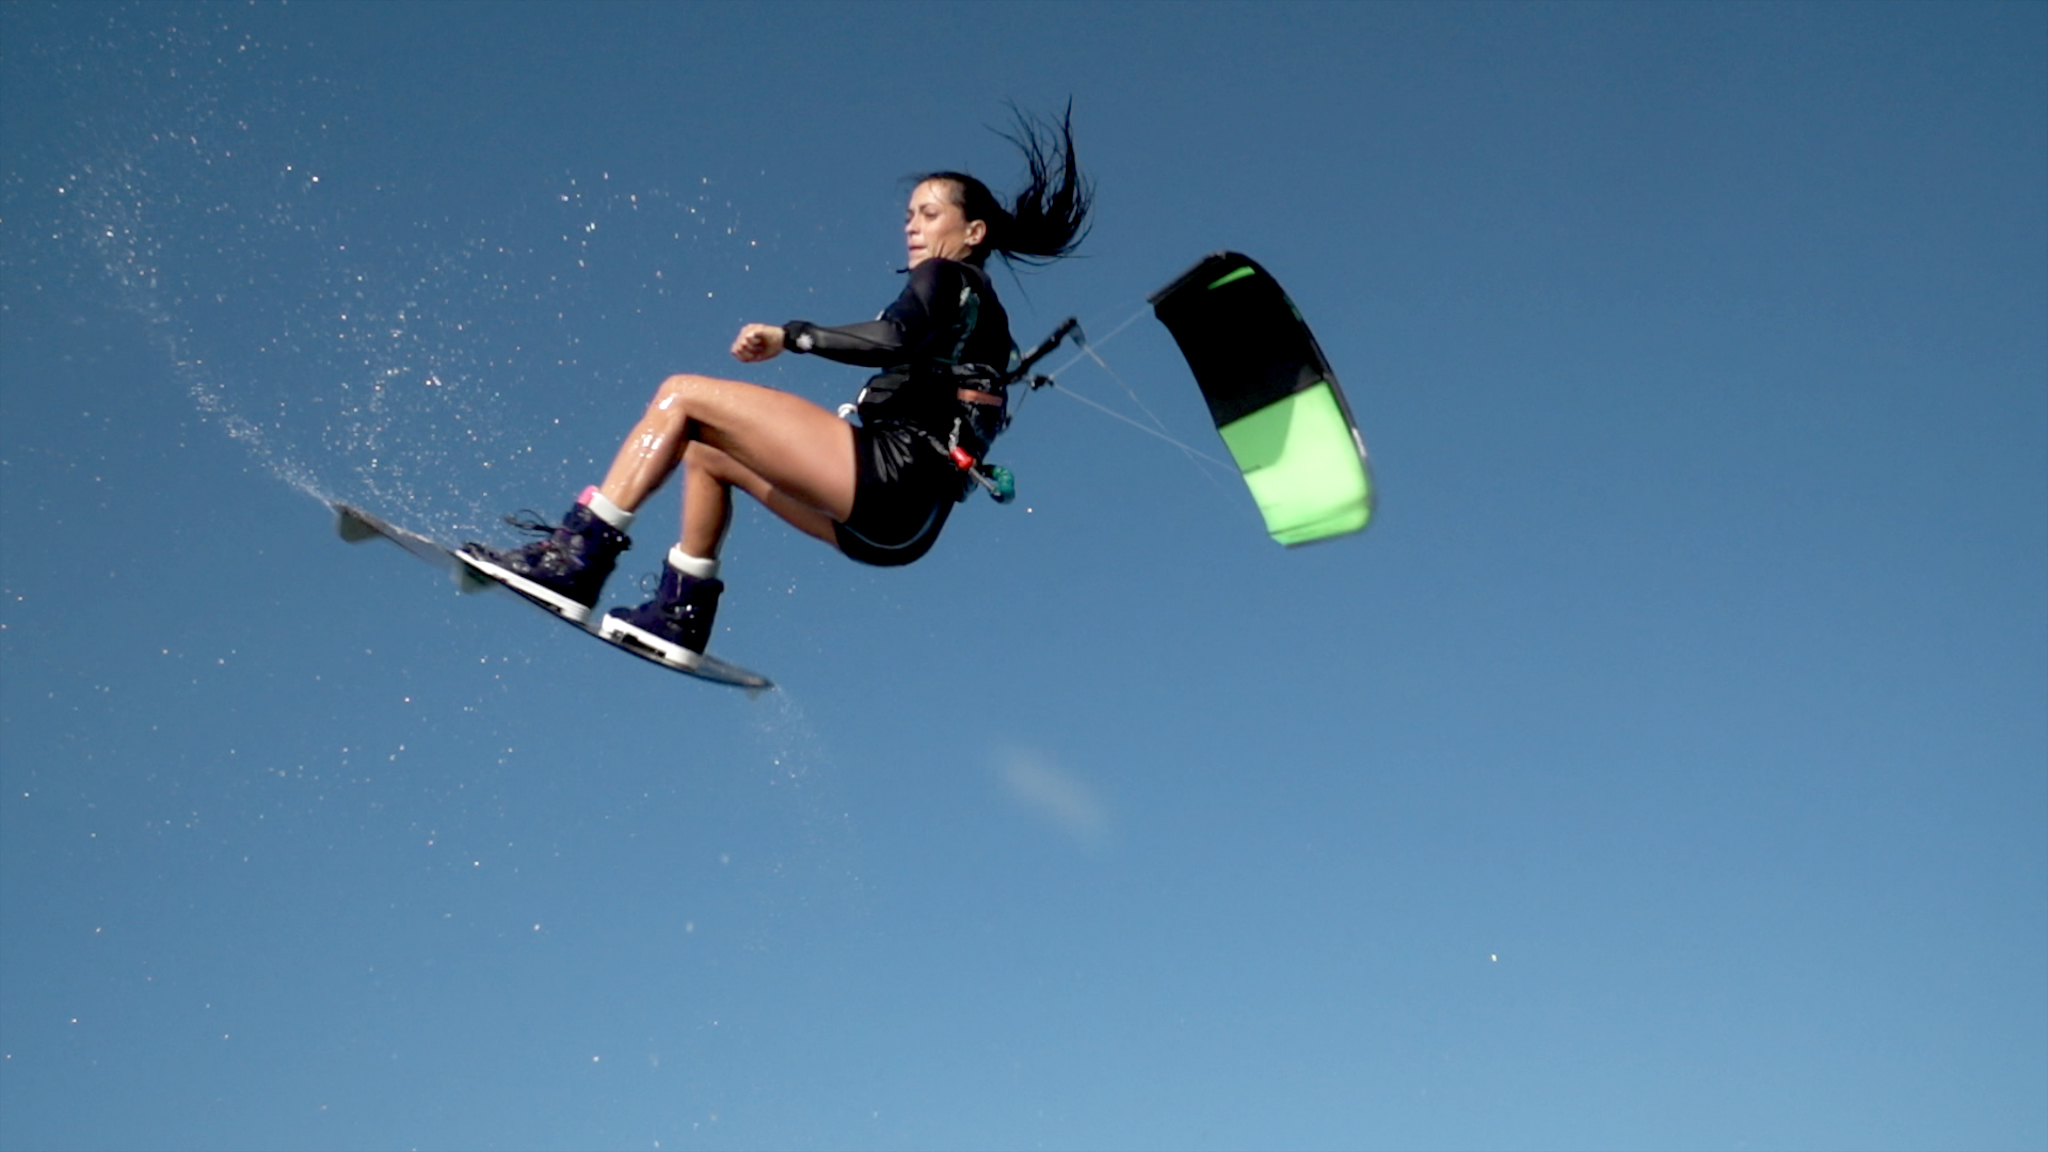 Woman flying high on kitesurfing board, kite visible above her